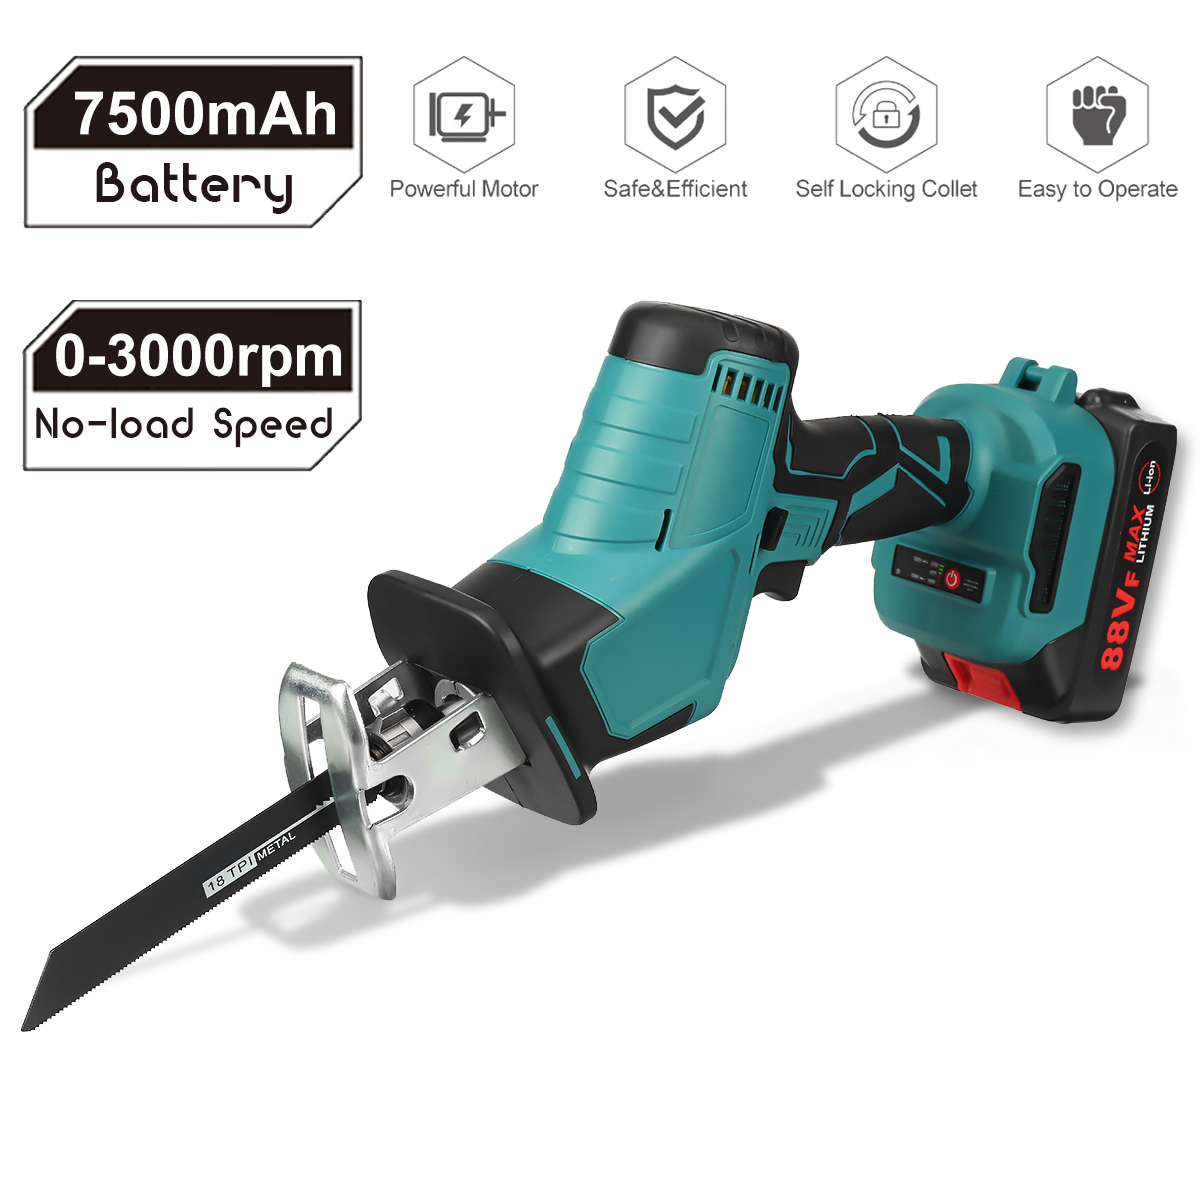 88VF-15mm-3000rpm-Portable-Electric-Cordless-Reciprocating-Saw-Pruning-Chain-Saw-Rechargeable-Woodwo-1918612-2